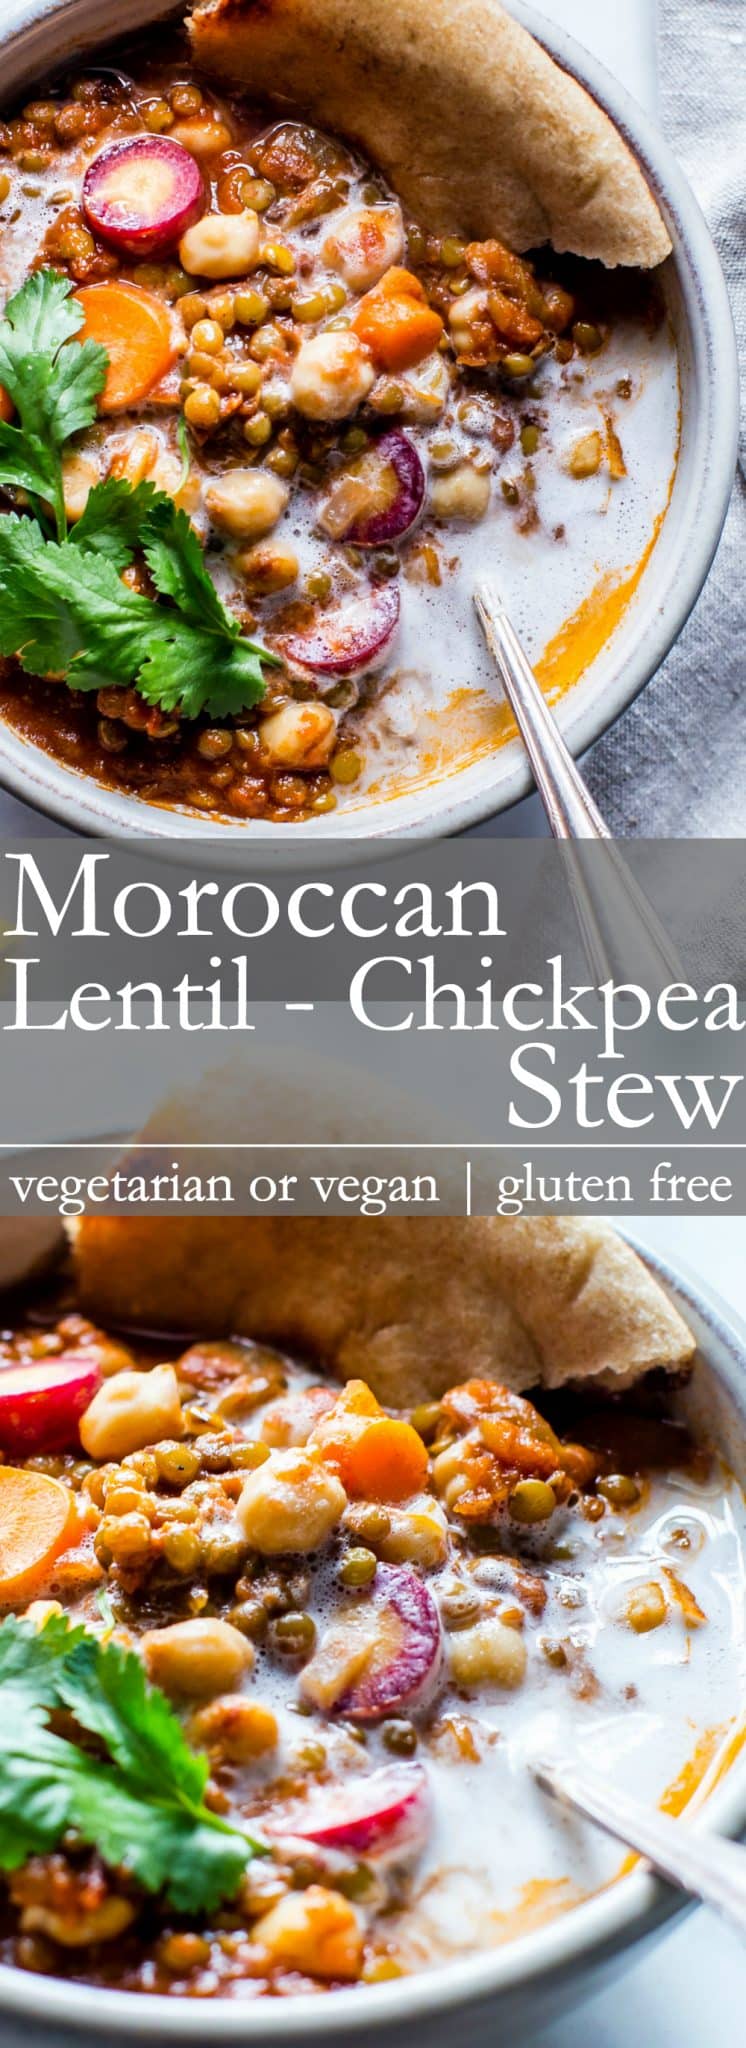 Pinterest pin for moroccan Lentil Chickpea Stew.